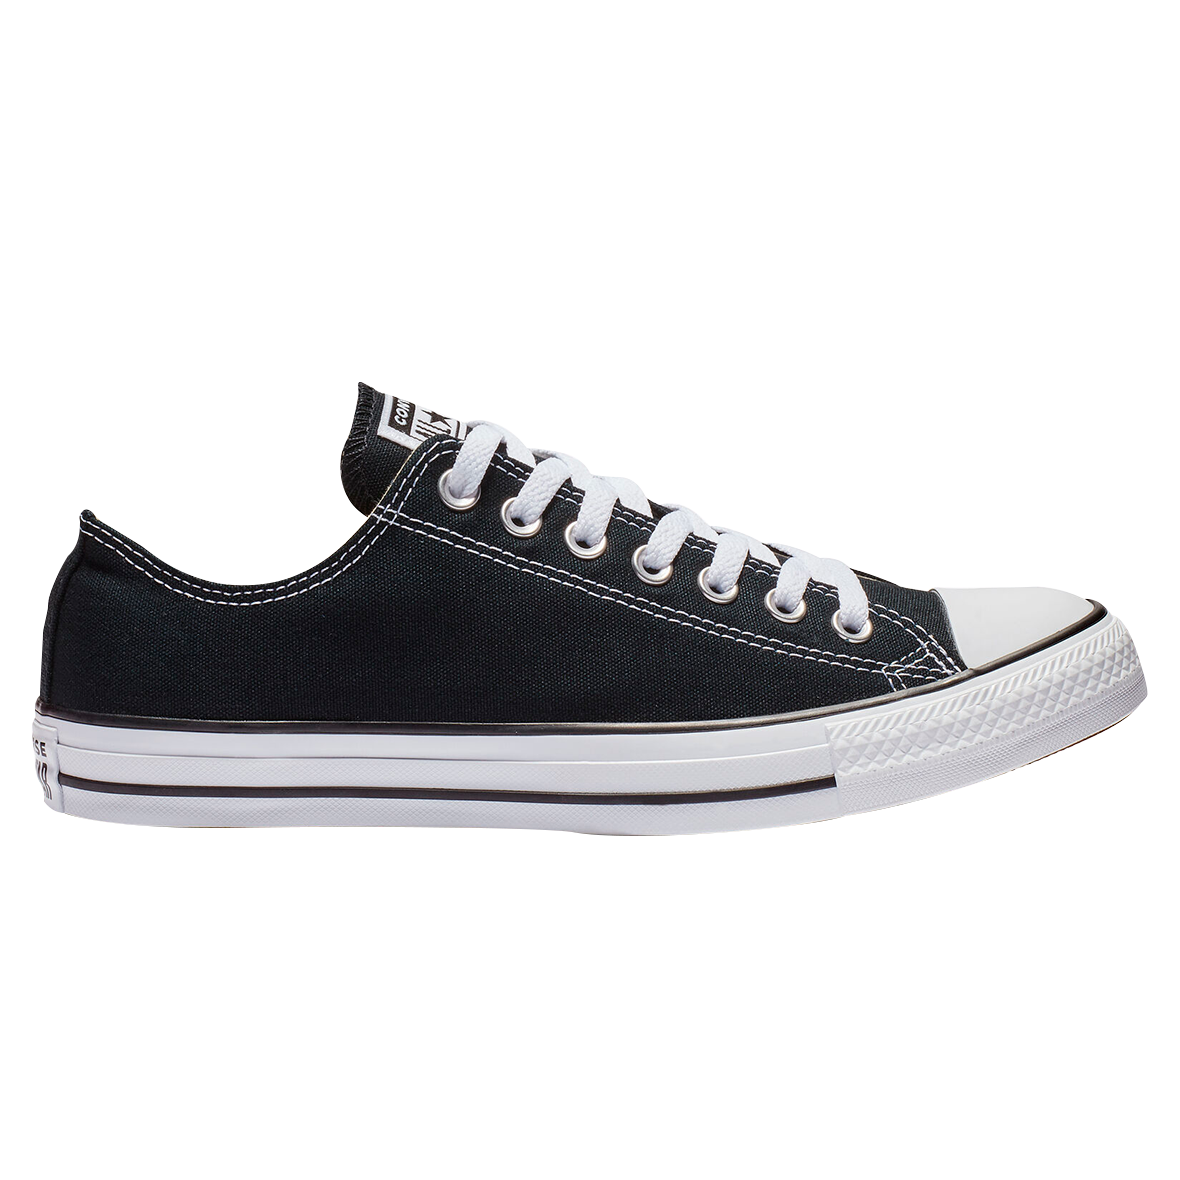 CONVERSE CHUCK TAYLOR ALL STAR OX UNISEX COLOR NEGRO